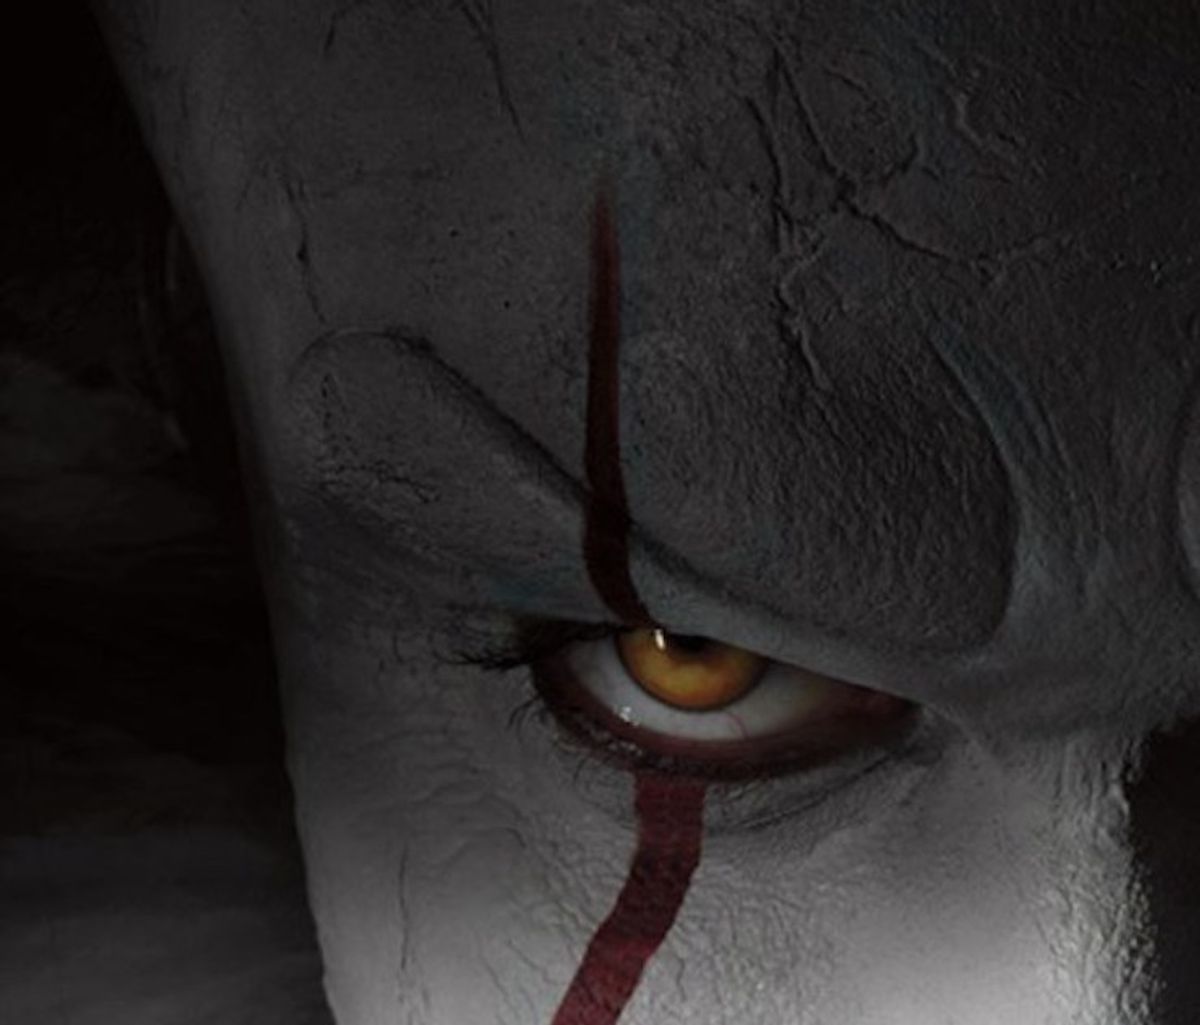 Meet The 'New' Pennywise Clown